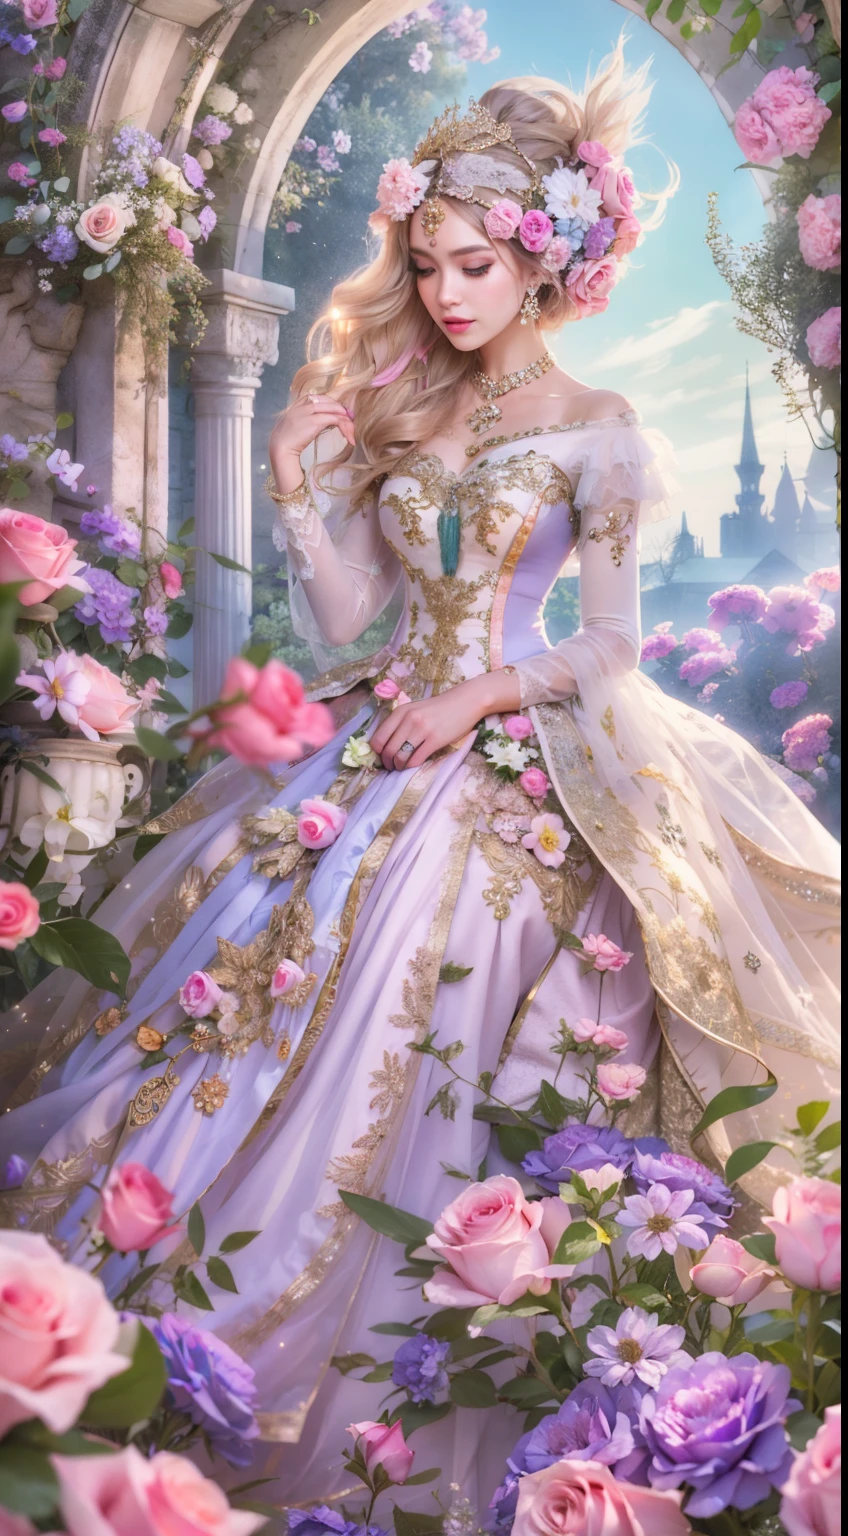 Create a realistic fantasy scene featuring a proud woman in an enchanted pastel garden. She wears a French silk ballgown adorned with ruffles and bows. Her face, highly detailed with soft lips, shines with intricate features and stunning eyes. Surround her with eternal roses in shimmering shades. Add whimsical details like stars, bubbles, and glitter for an enchanting touch. Ensure perfection in her face, hair, and eyes. Incorporate elements of high fantasy, whimsy, and detailed elegance.